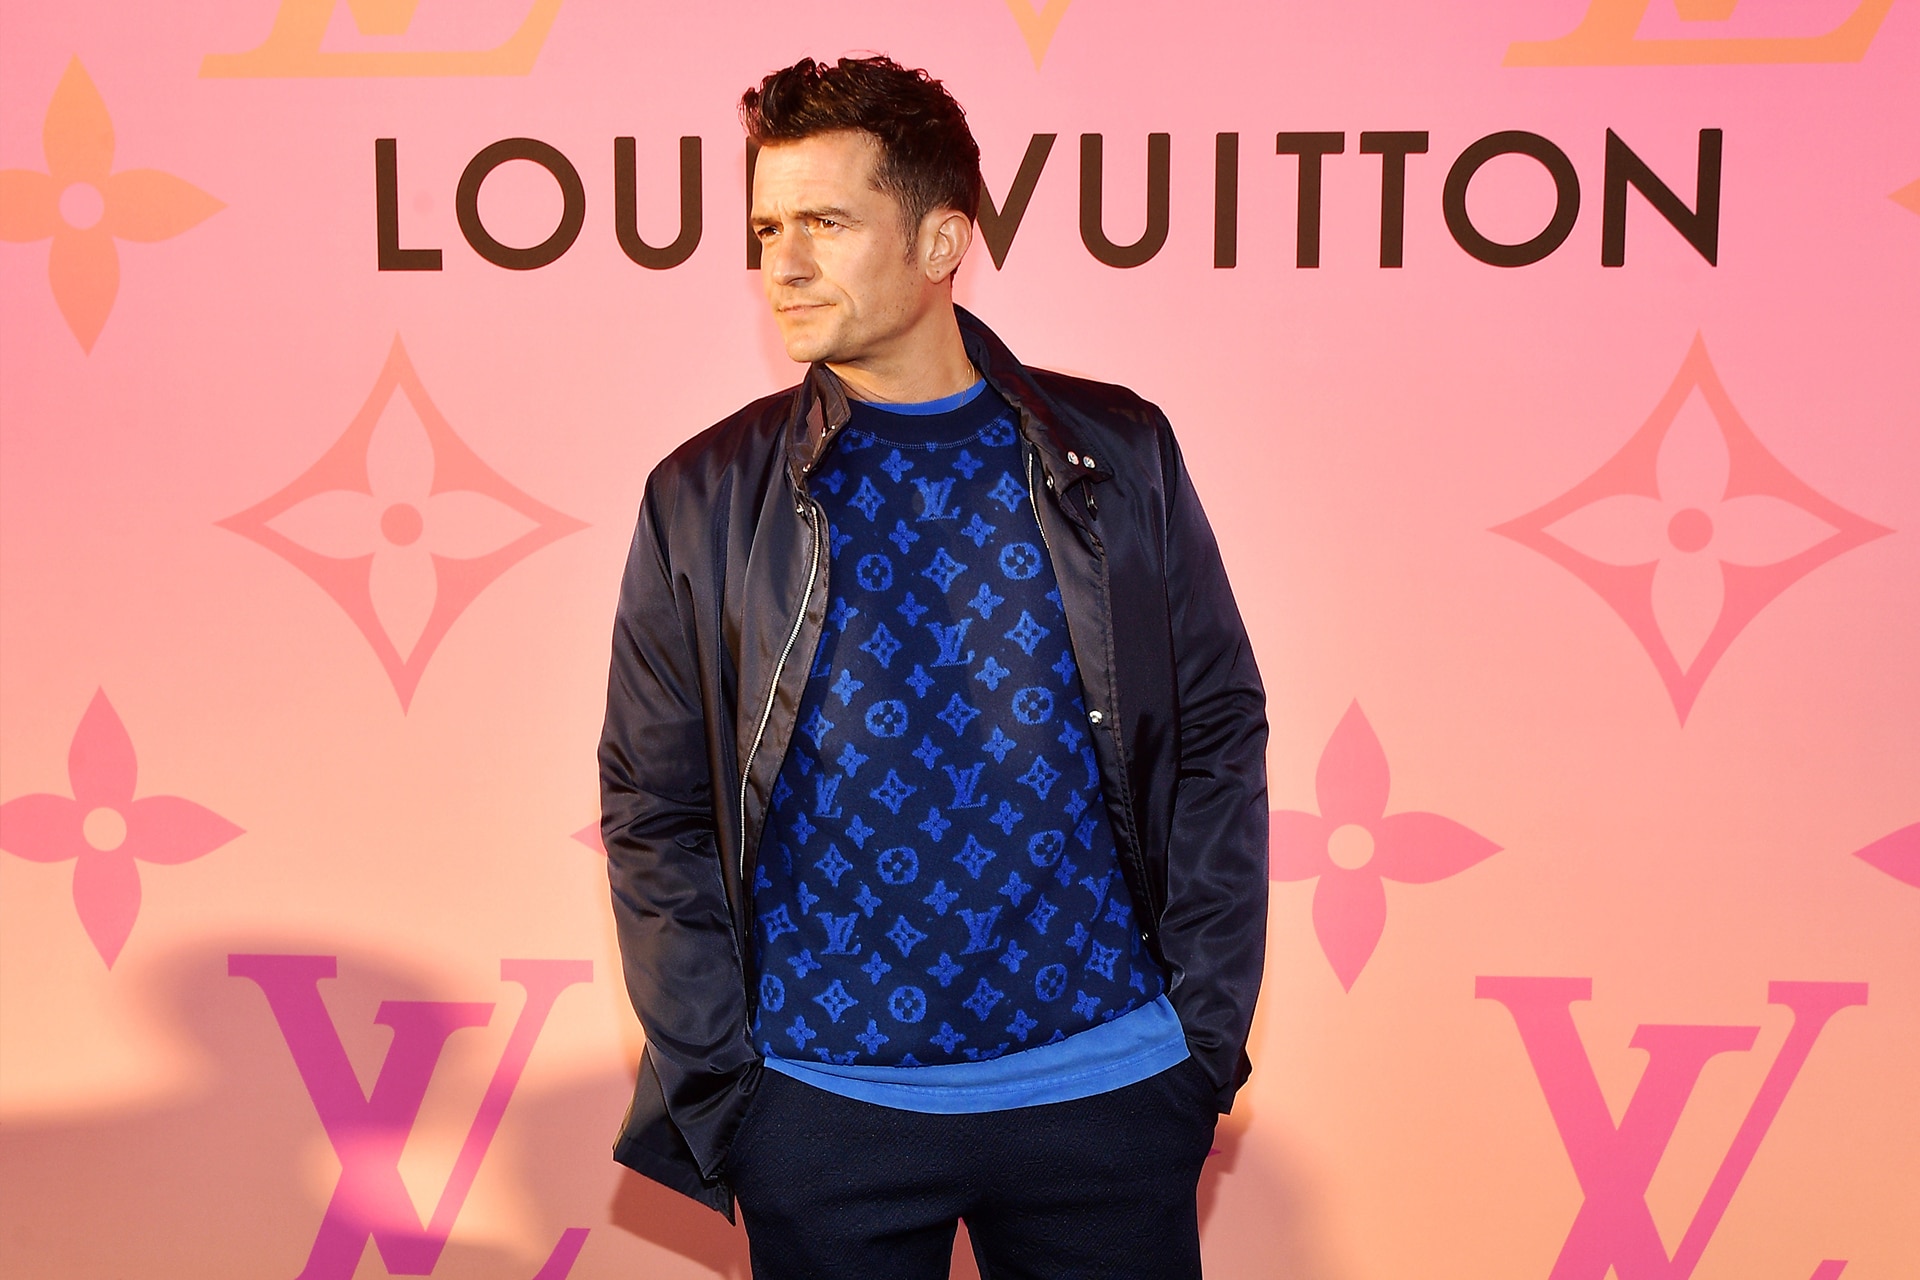 Louis Vuitton: the world's most valuable luxury brand - Red Lion Data